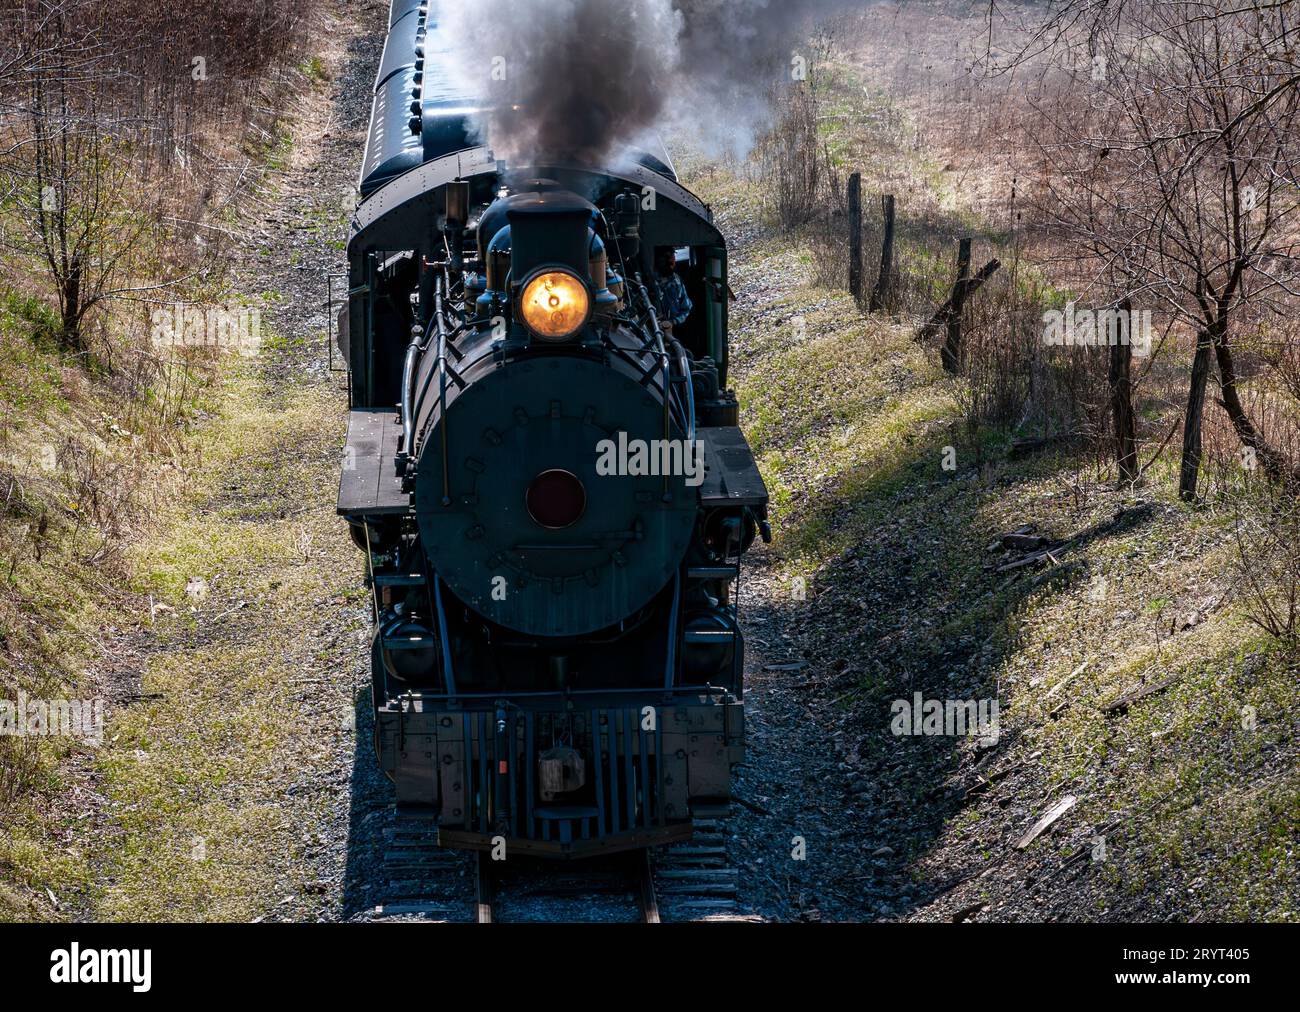 An industrial locomotive in motion, emitting a white plume of steam from its smokestack Stock Photo